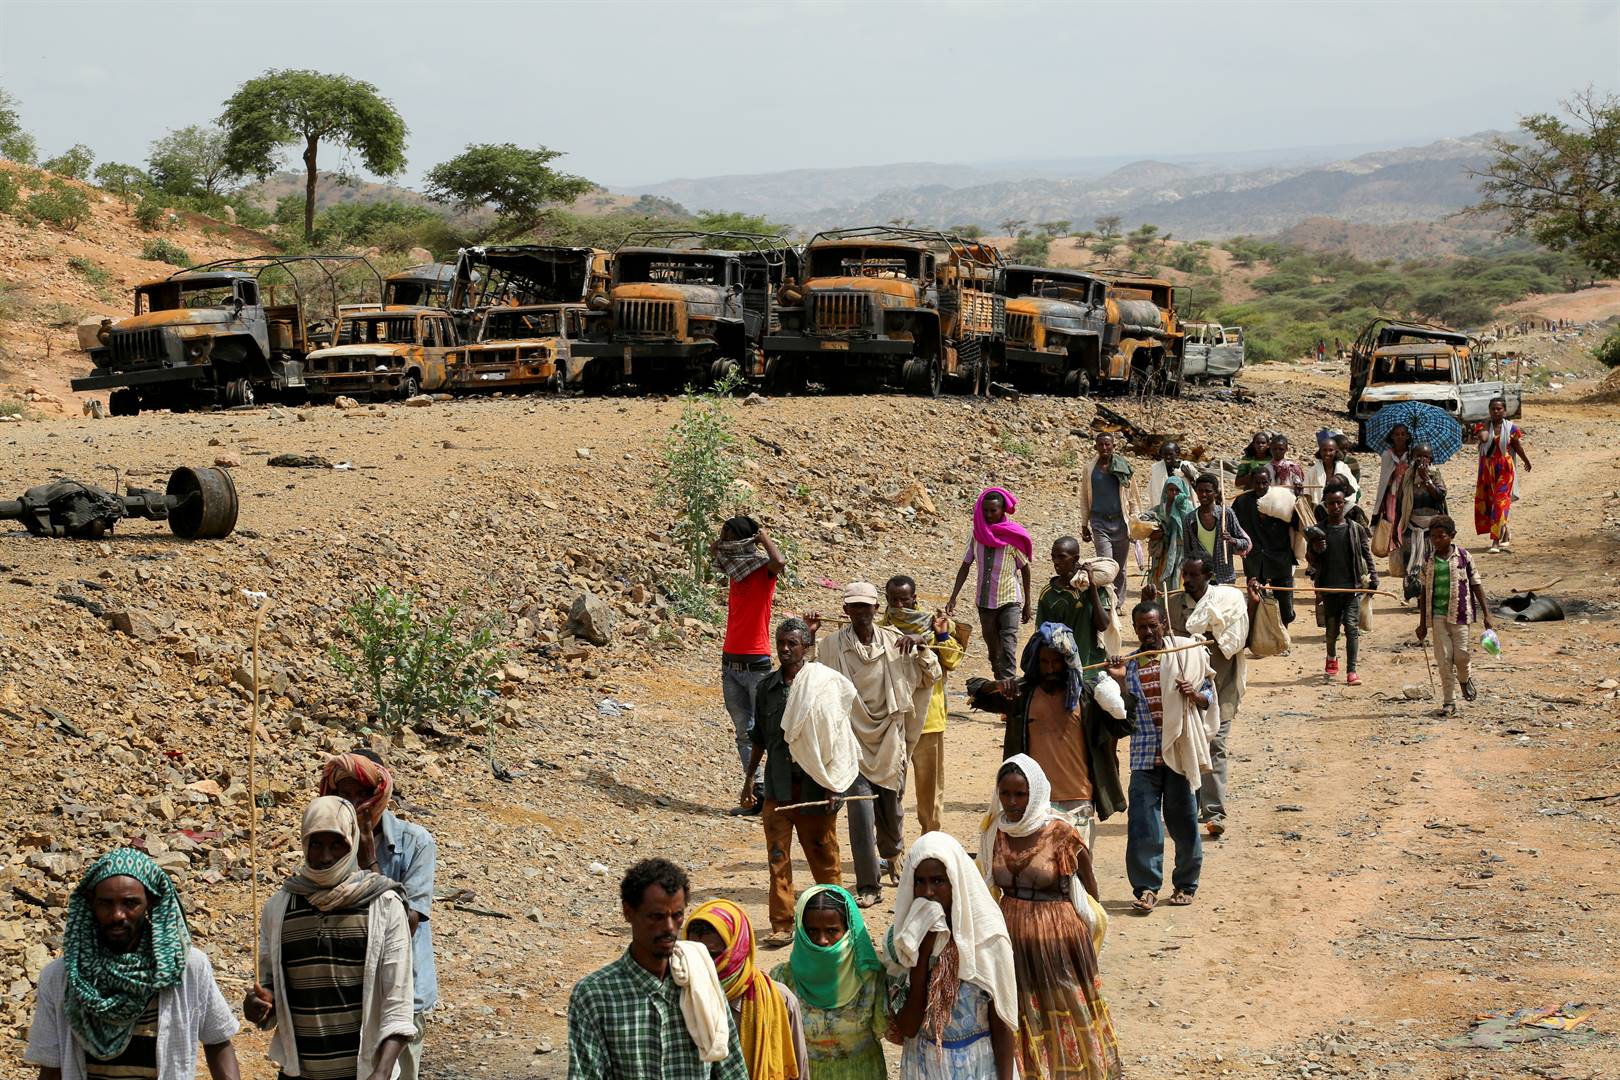 Residents walking back from a market in southern Tigray, Ethiopia, walk past vehicles that have caught fire. Photo: Reuters / Giulia Paravicini